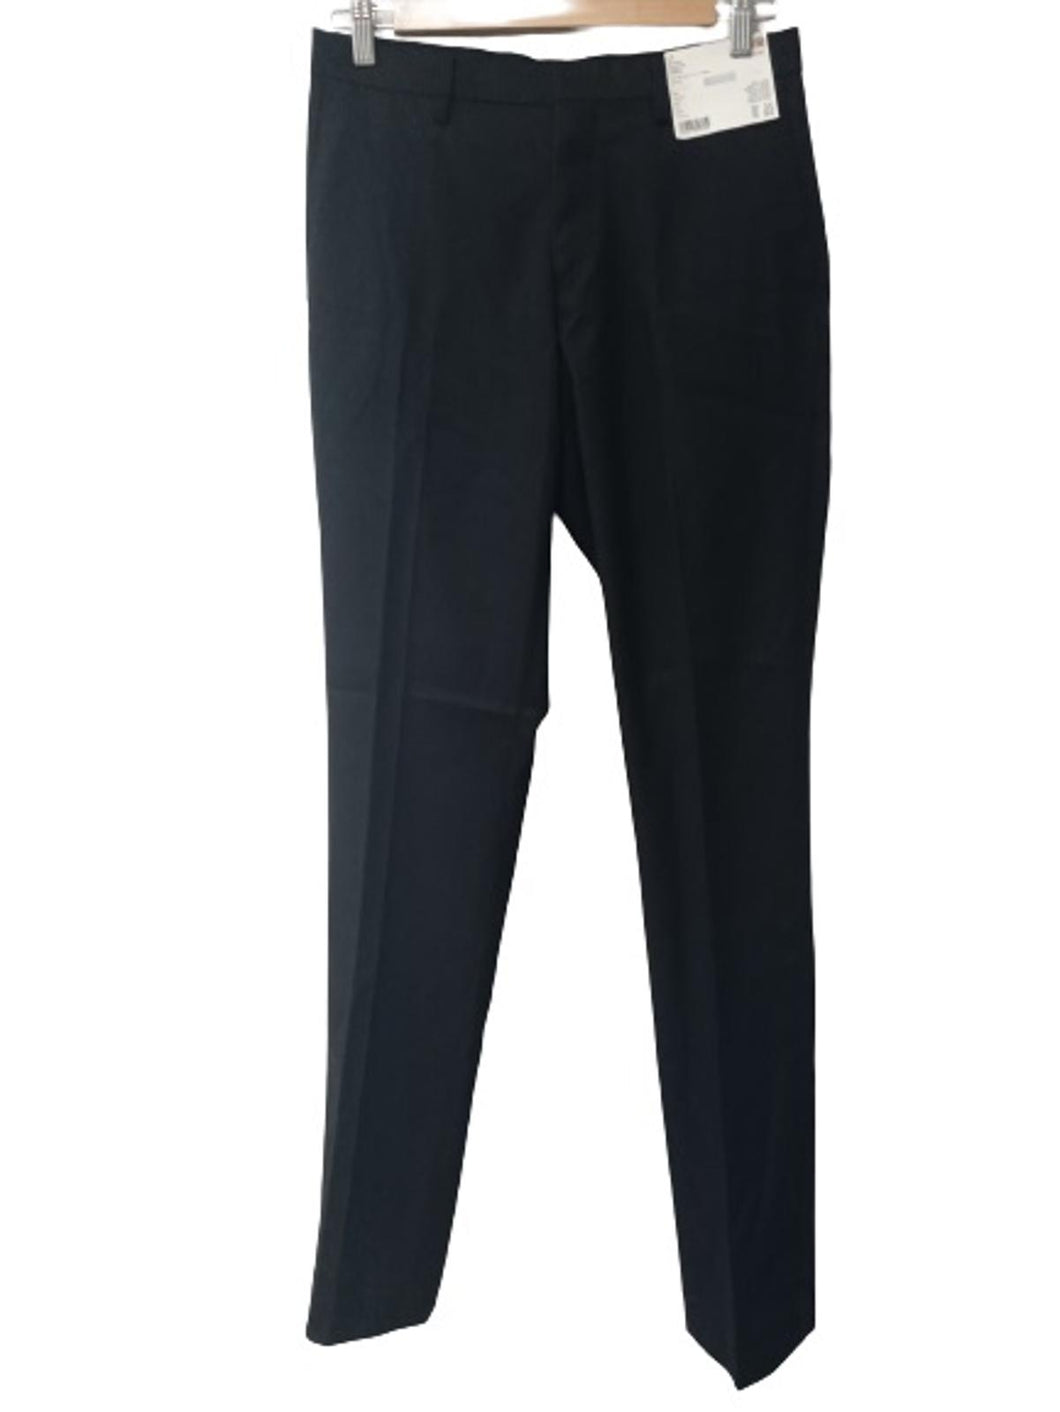 UNIQLO Men's Black Zip Fly Easy Care Slim Fit Trousers Size UK W29L34 NEW